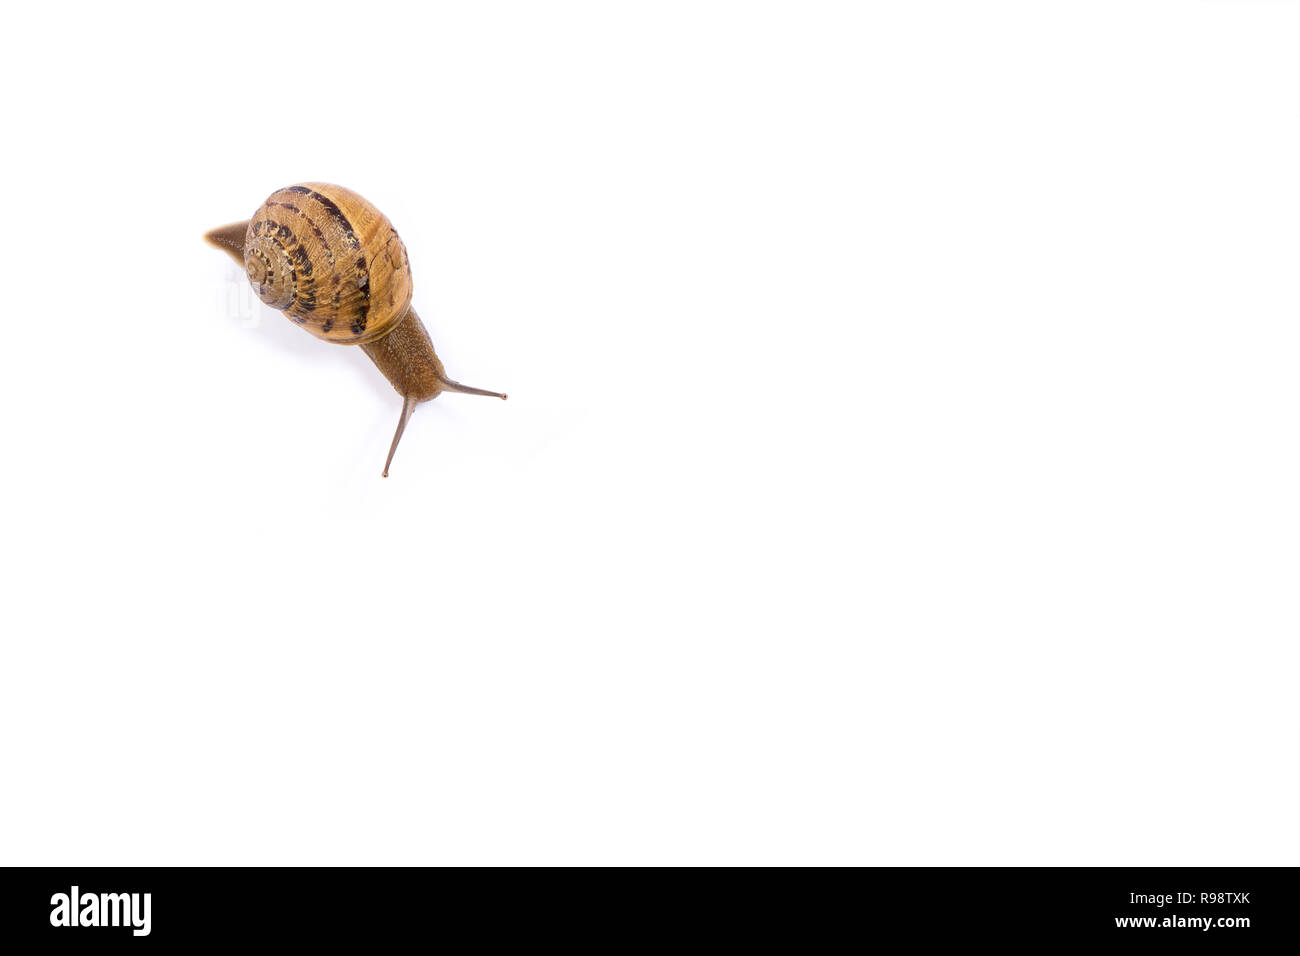 Snail isolated in white background with copy space Stock Photo